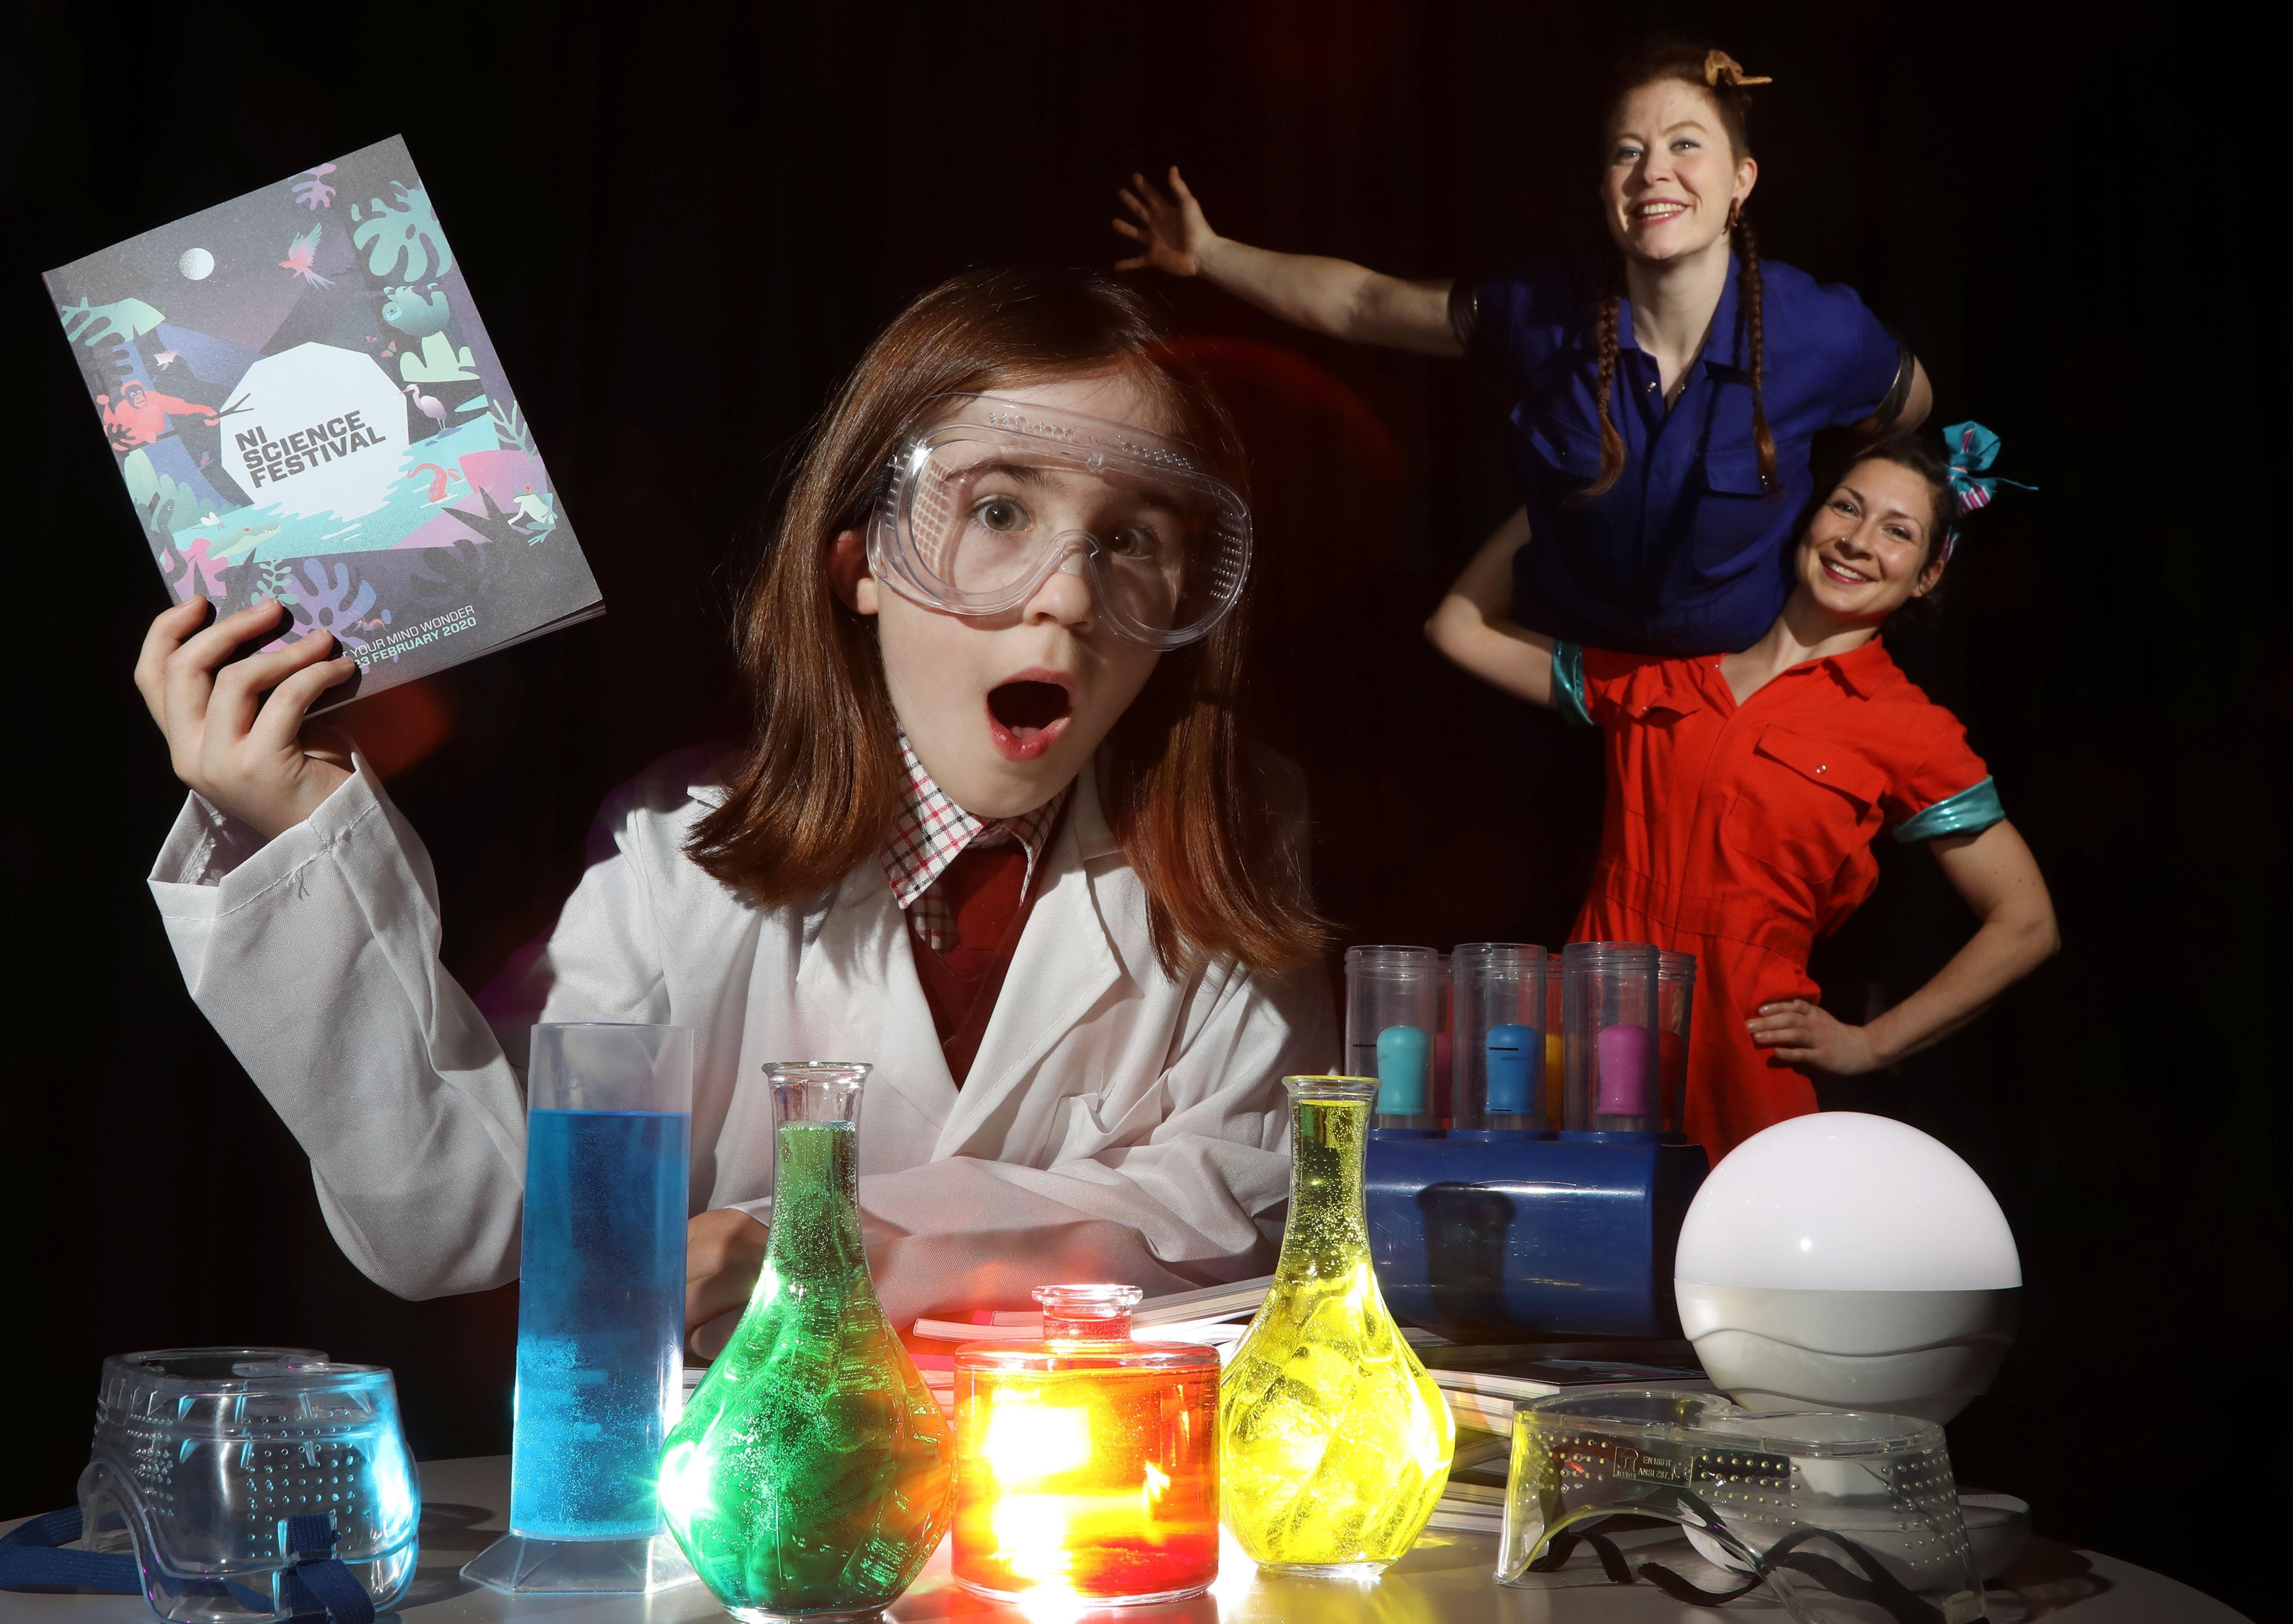 NI Science Festival announces the launch of its 2020 programme at the Crescent Arts Festival, featuring Strong Women Science. The duo will be performing at the festival on 18 February. Pictured Katie Harrison aged 9.